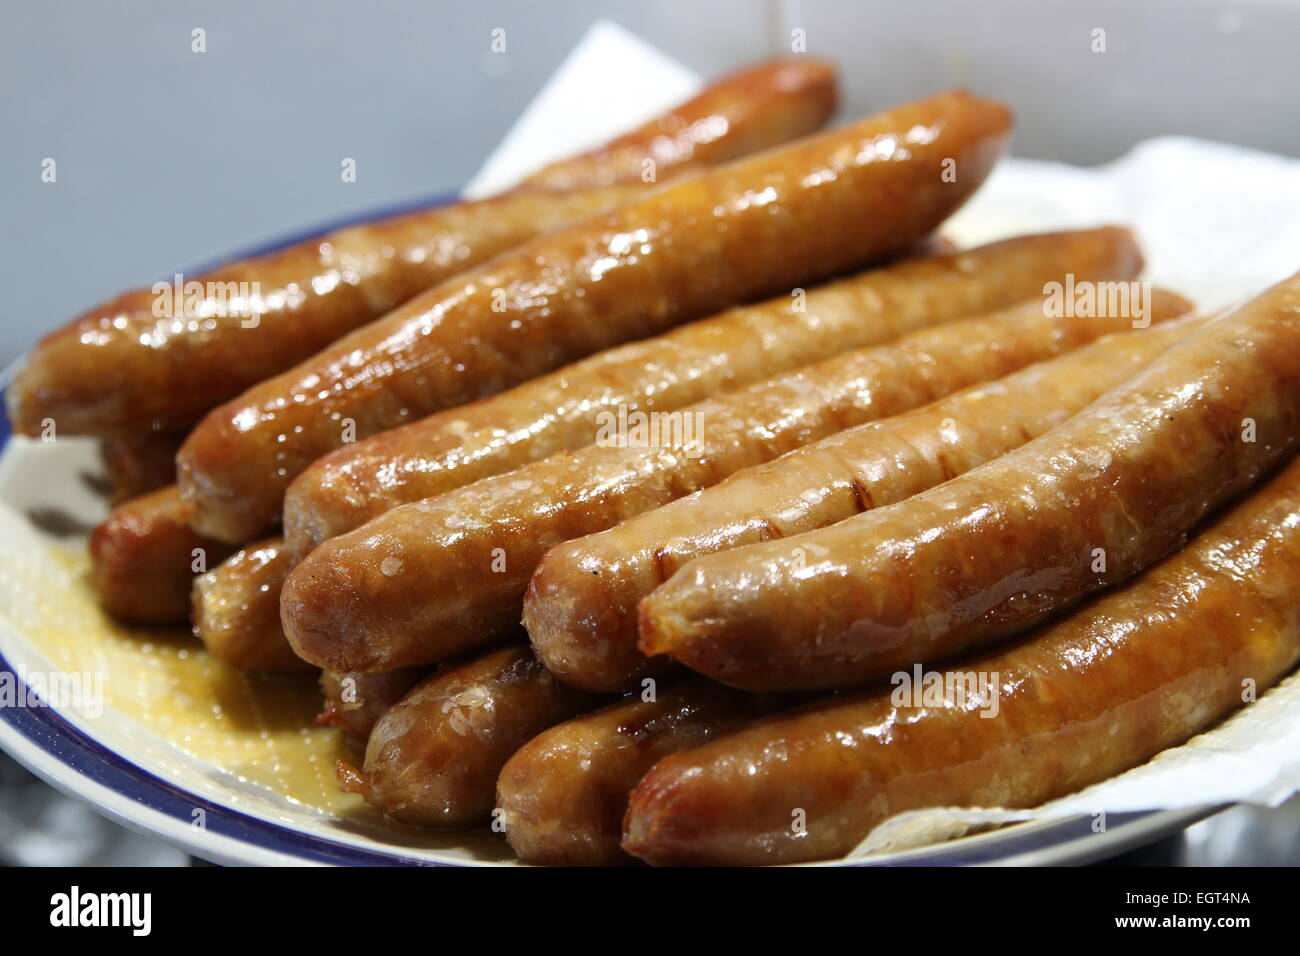 Close up of cooked sausages on a plate Stock Photo